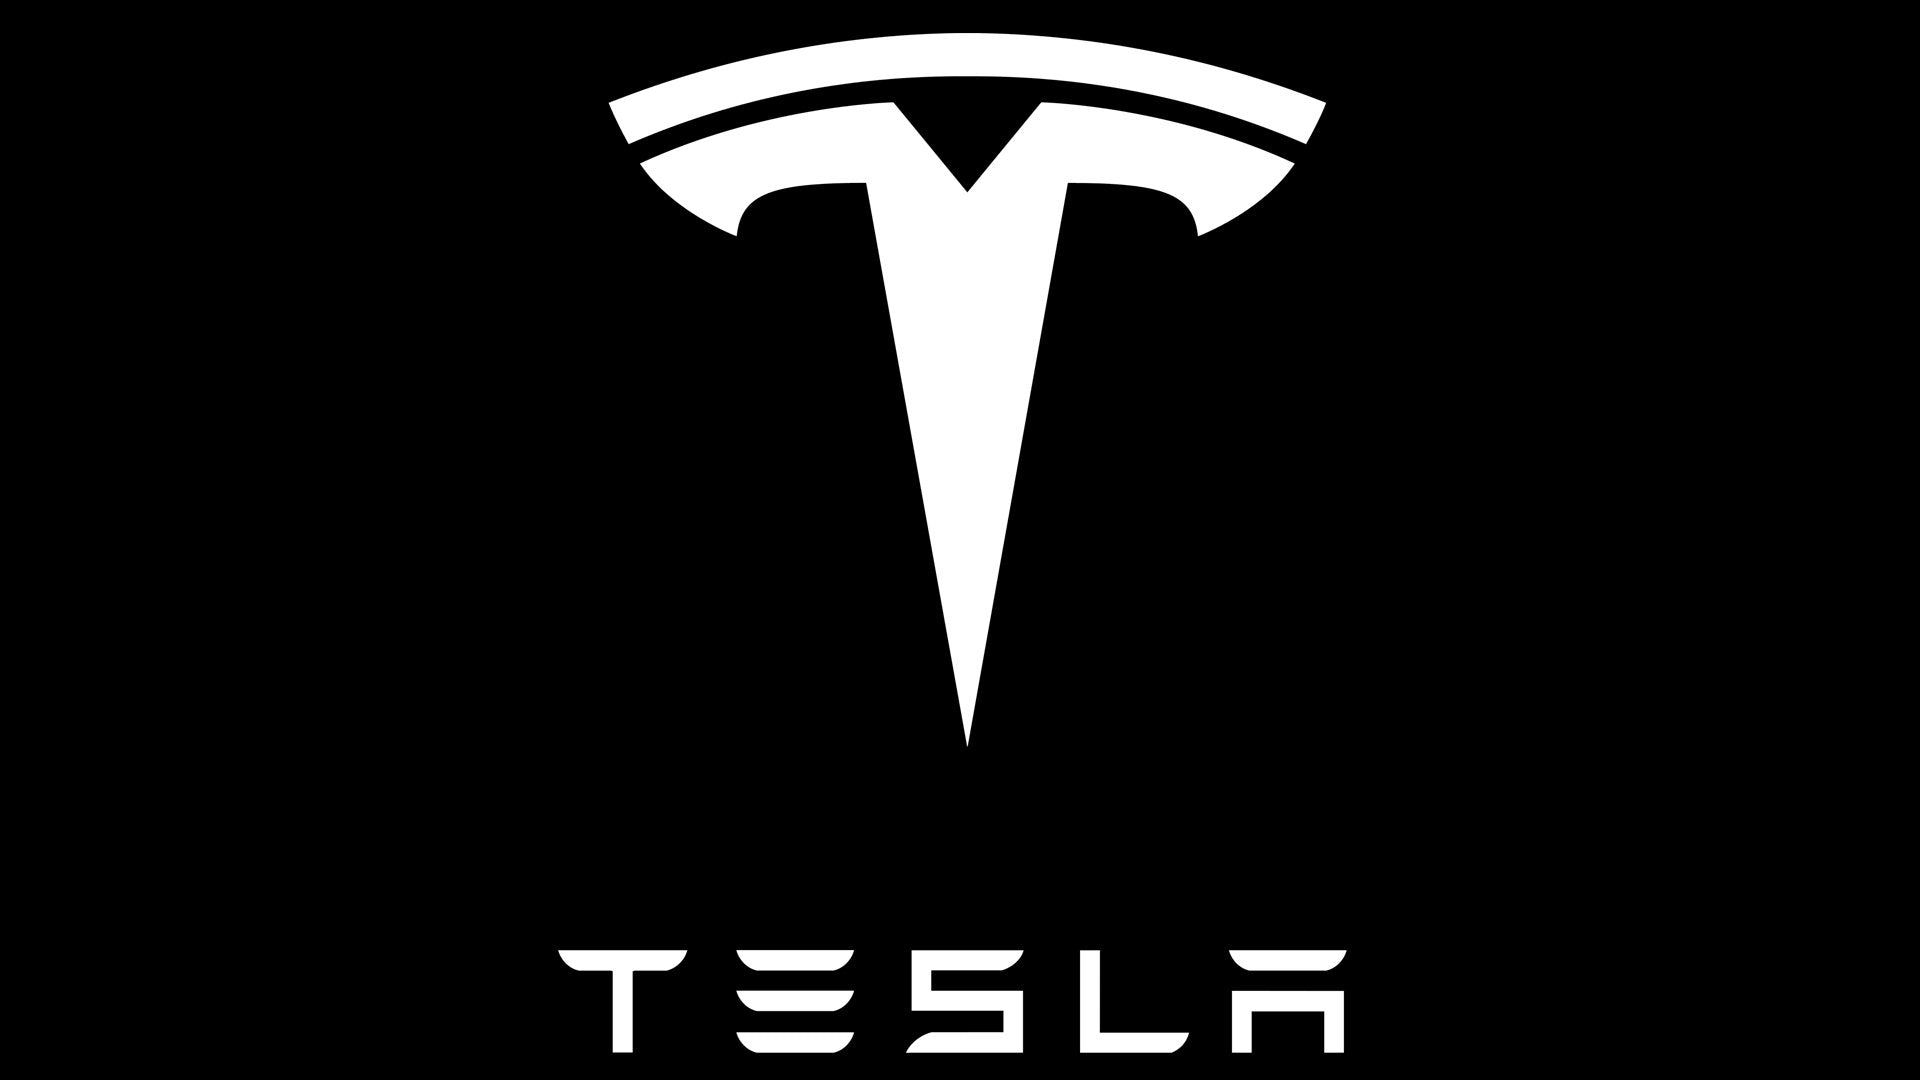 Tesla TSLA Short Sellers Lost $35 Billion in 2020, 'There's Nothing That Compares to it That I Can Remember,' Says S3 Partners' Ihor Dusaniwsky